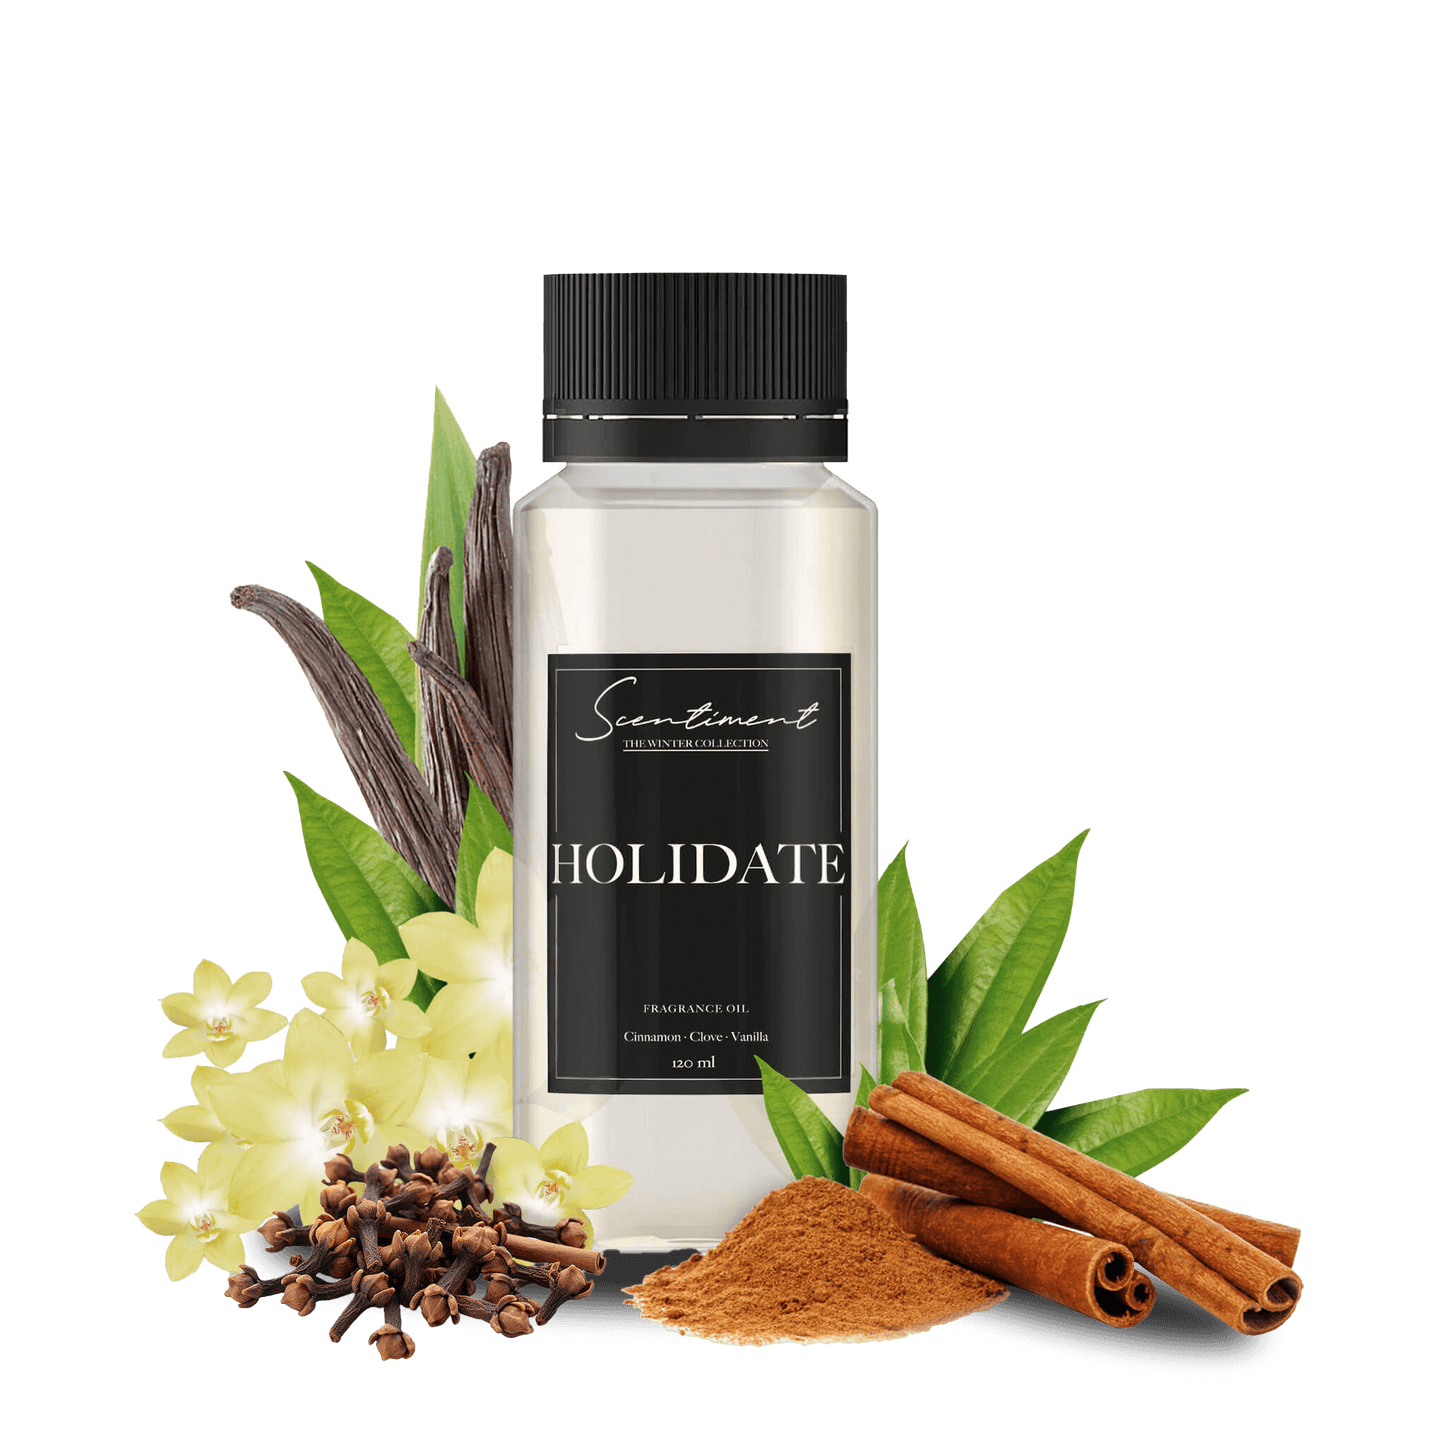 Holidate Fragrance Oil with notes of Cinnamon, Clove, and Vanilla.